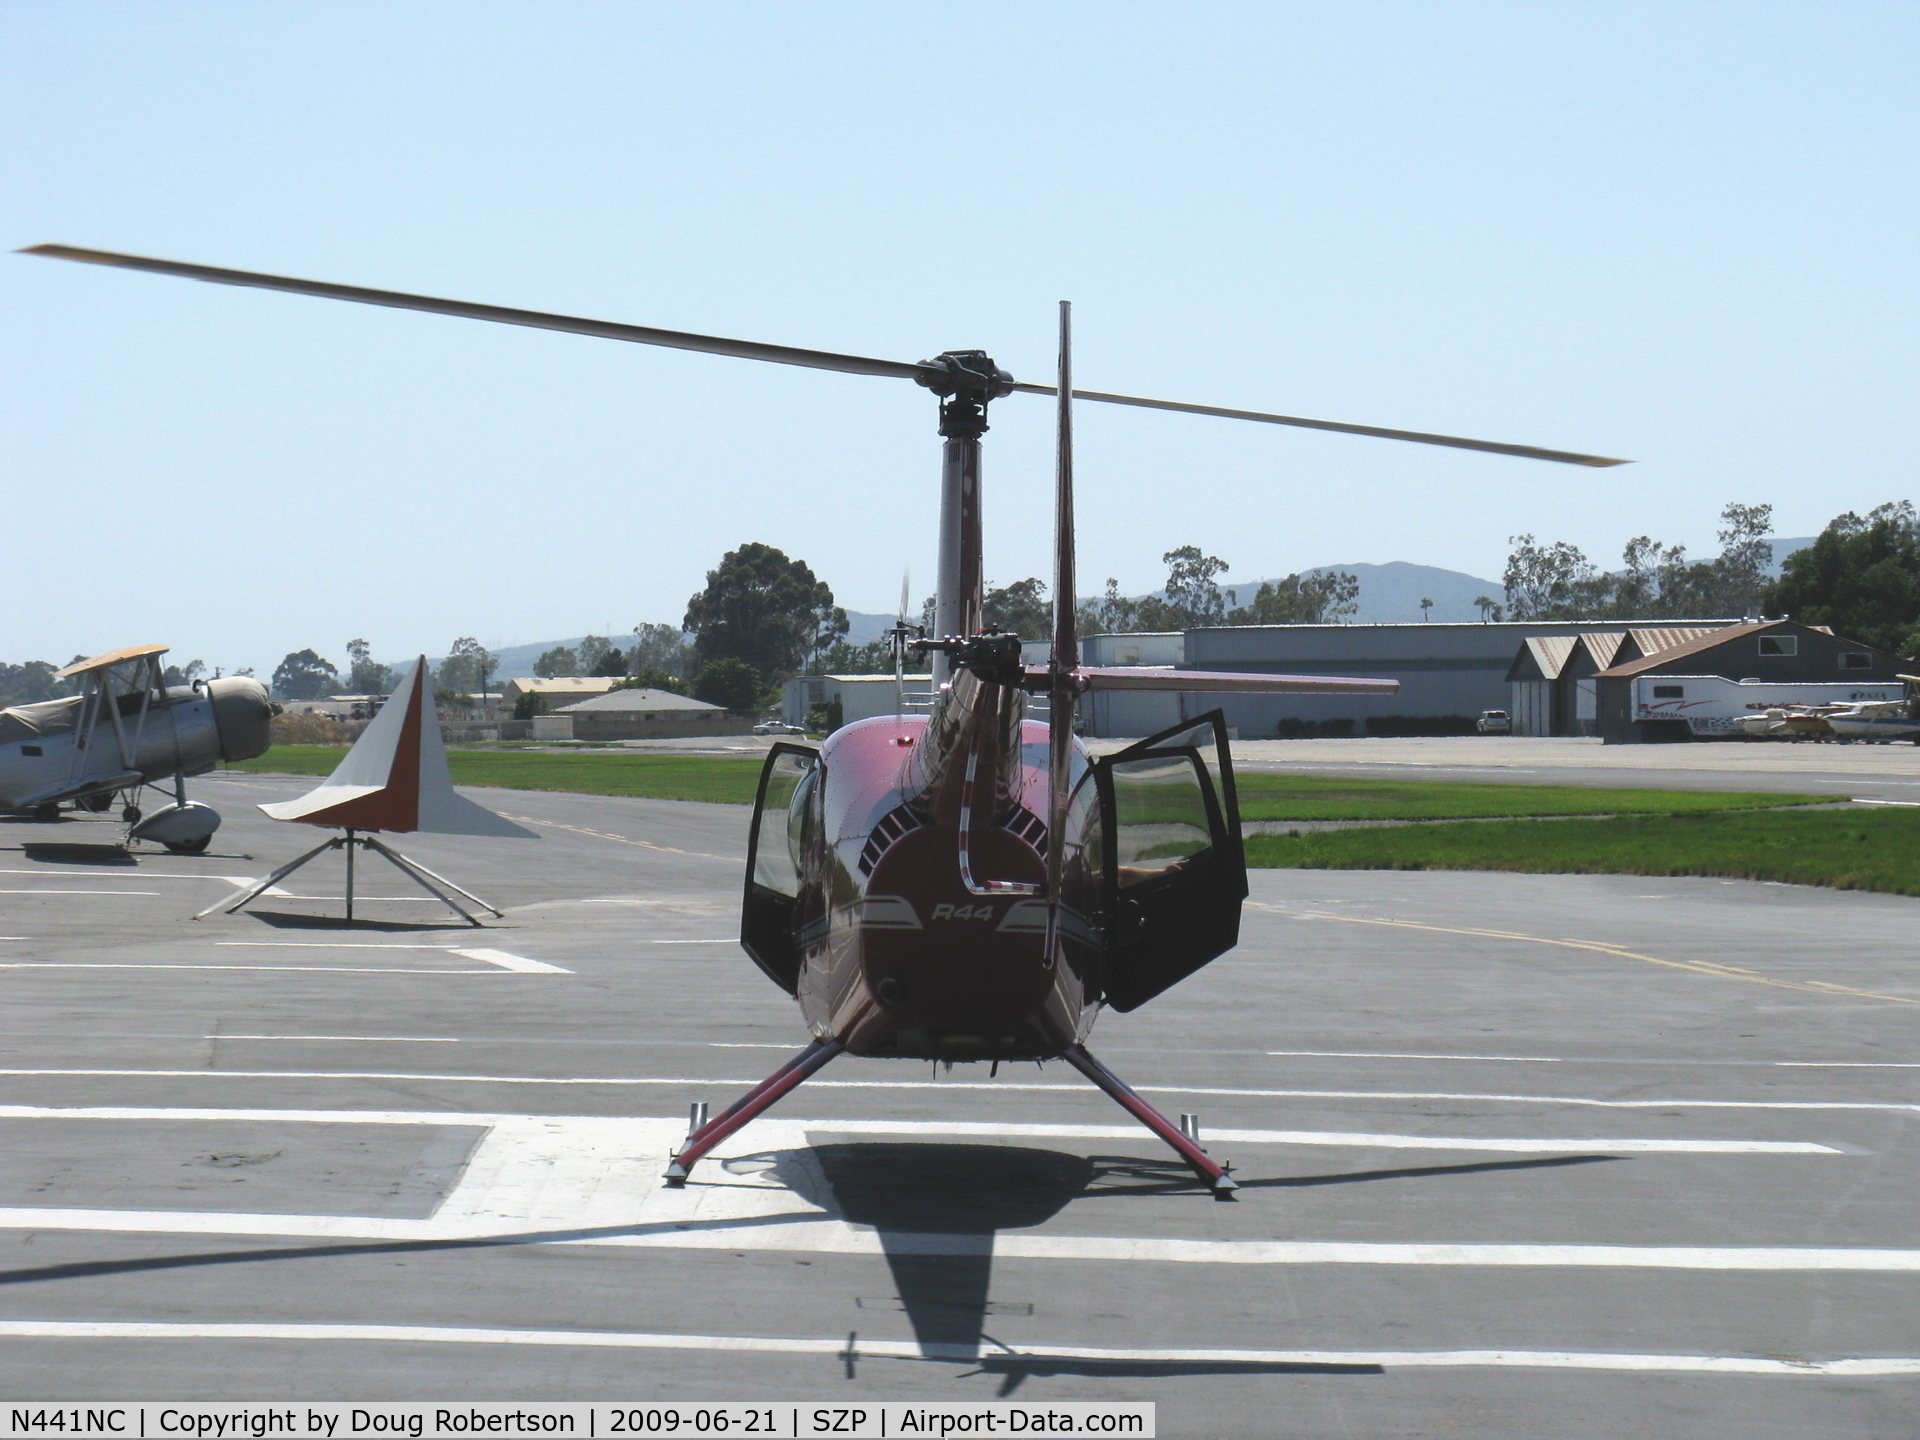 N441NC, 2005 Robinson R44 II C/N 10621, 2005 Robinson R44 RAVEN II, Lycoming IO-540 derated to 245 Hp for 5 min., 205 Hp cont.